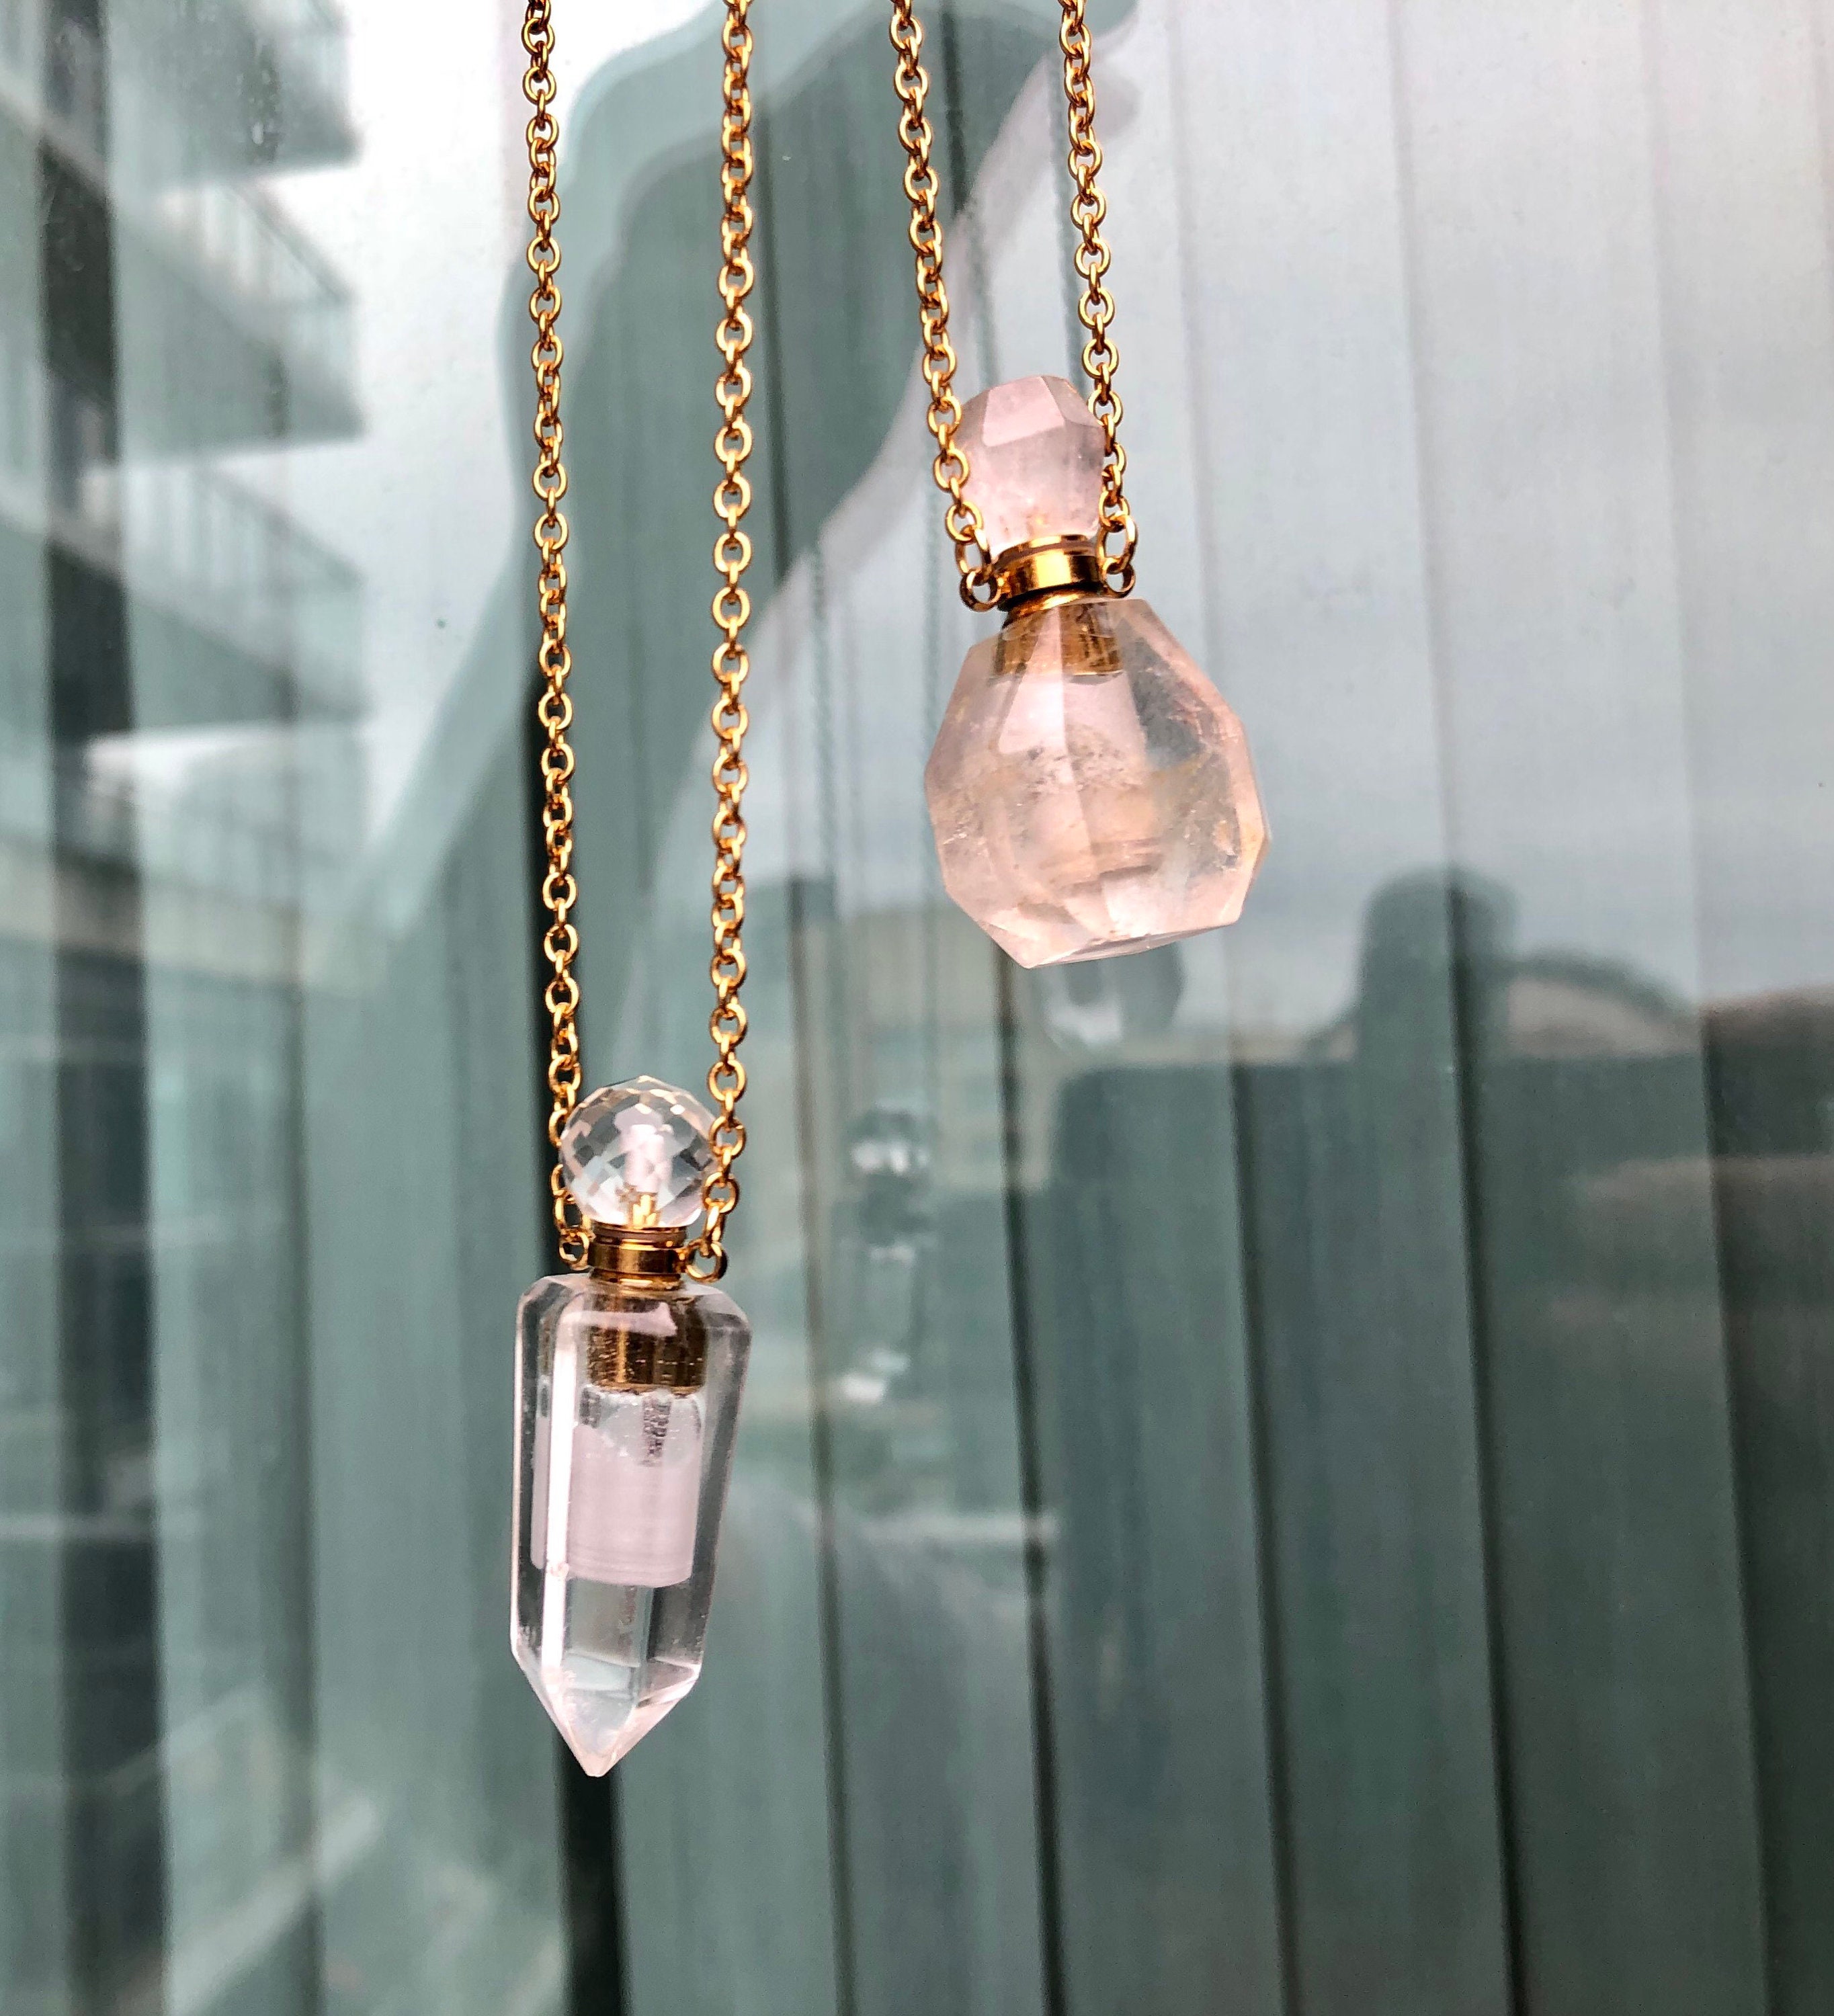 Crystal Clarity: Clear Quartz Bottle Pendant Necklace Holder for Perfume, Incense, and Ashes